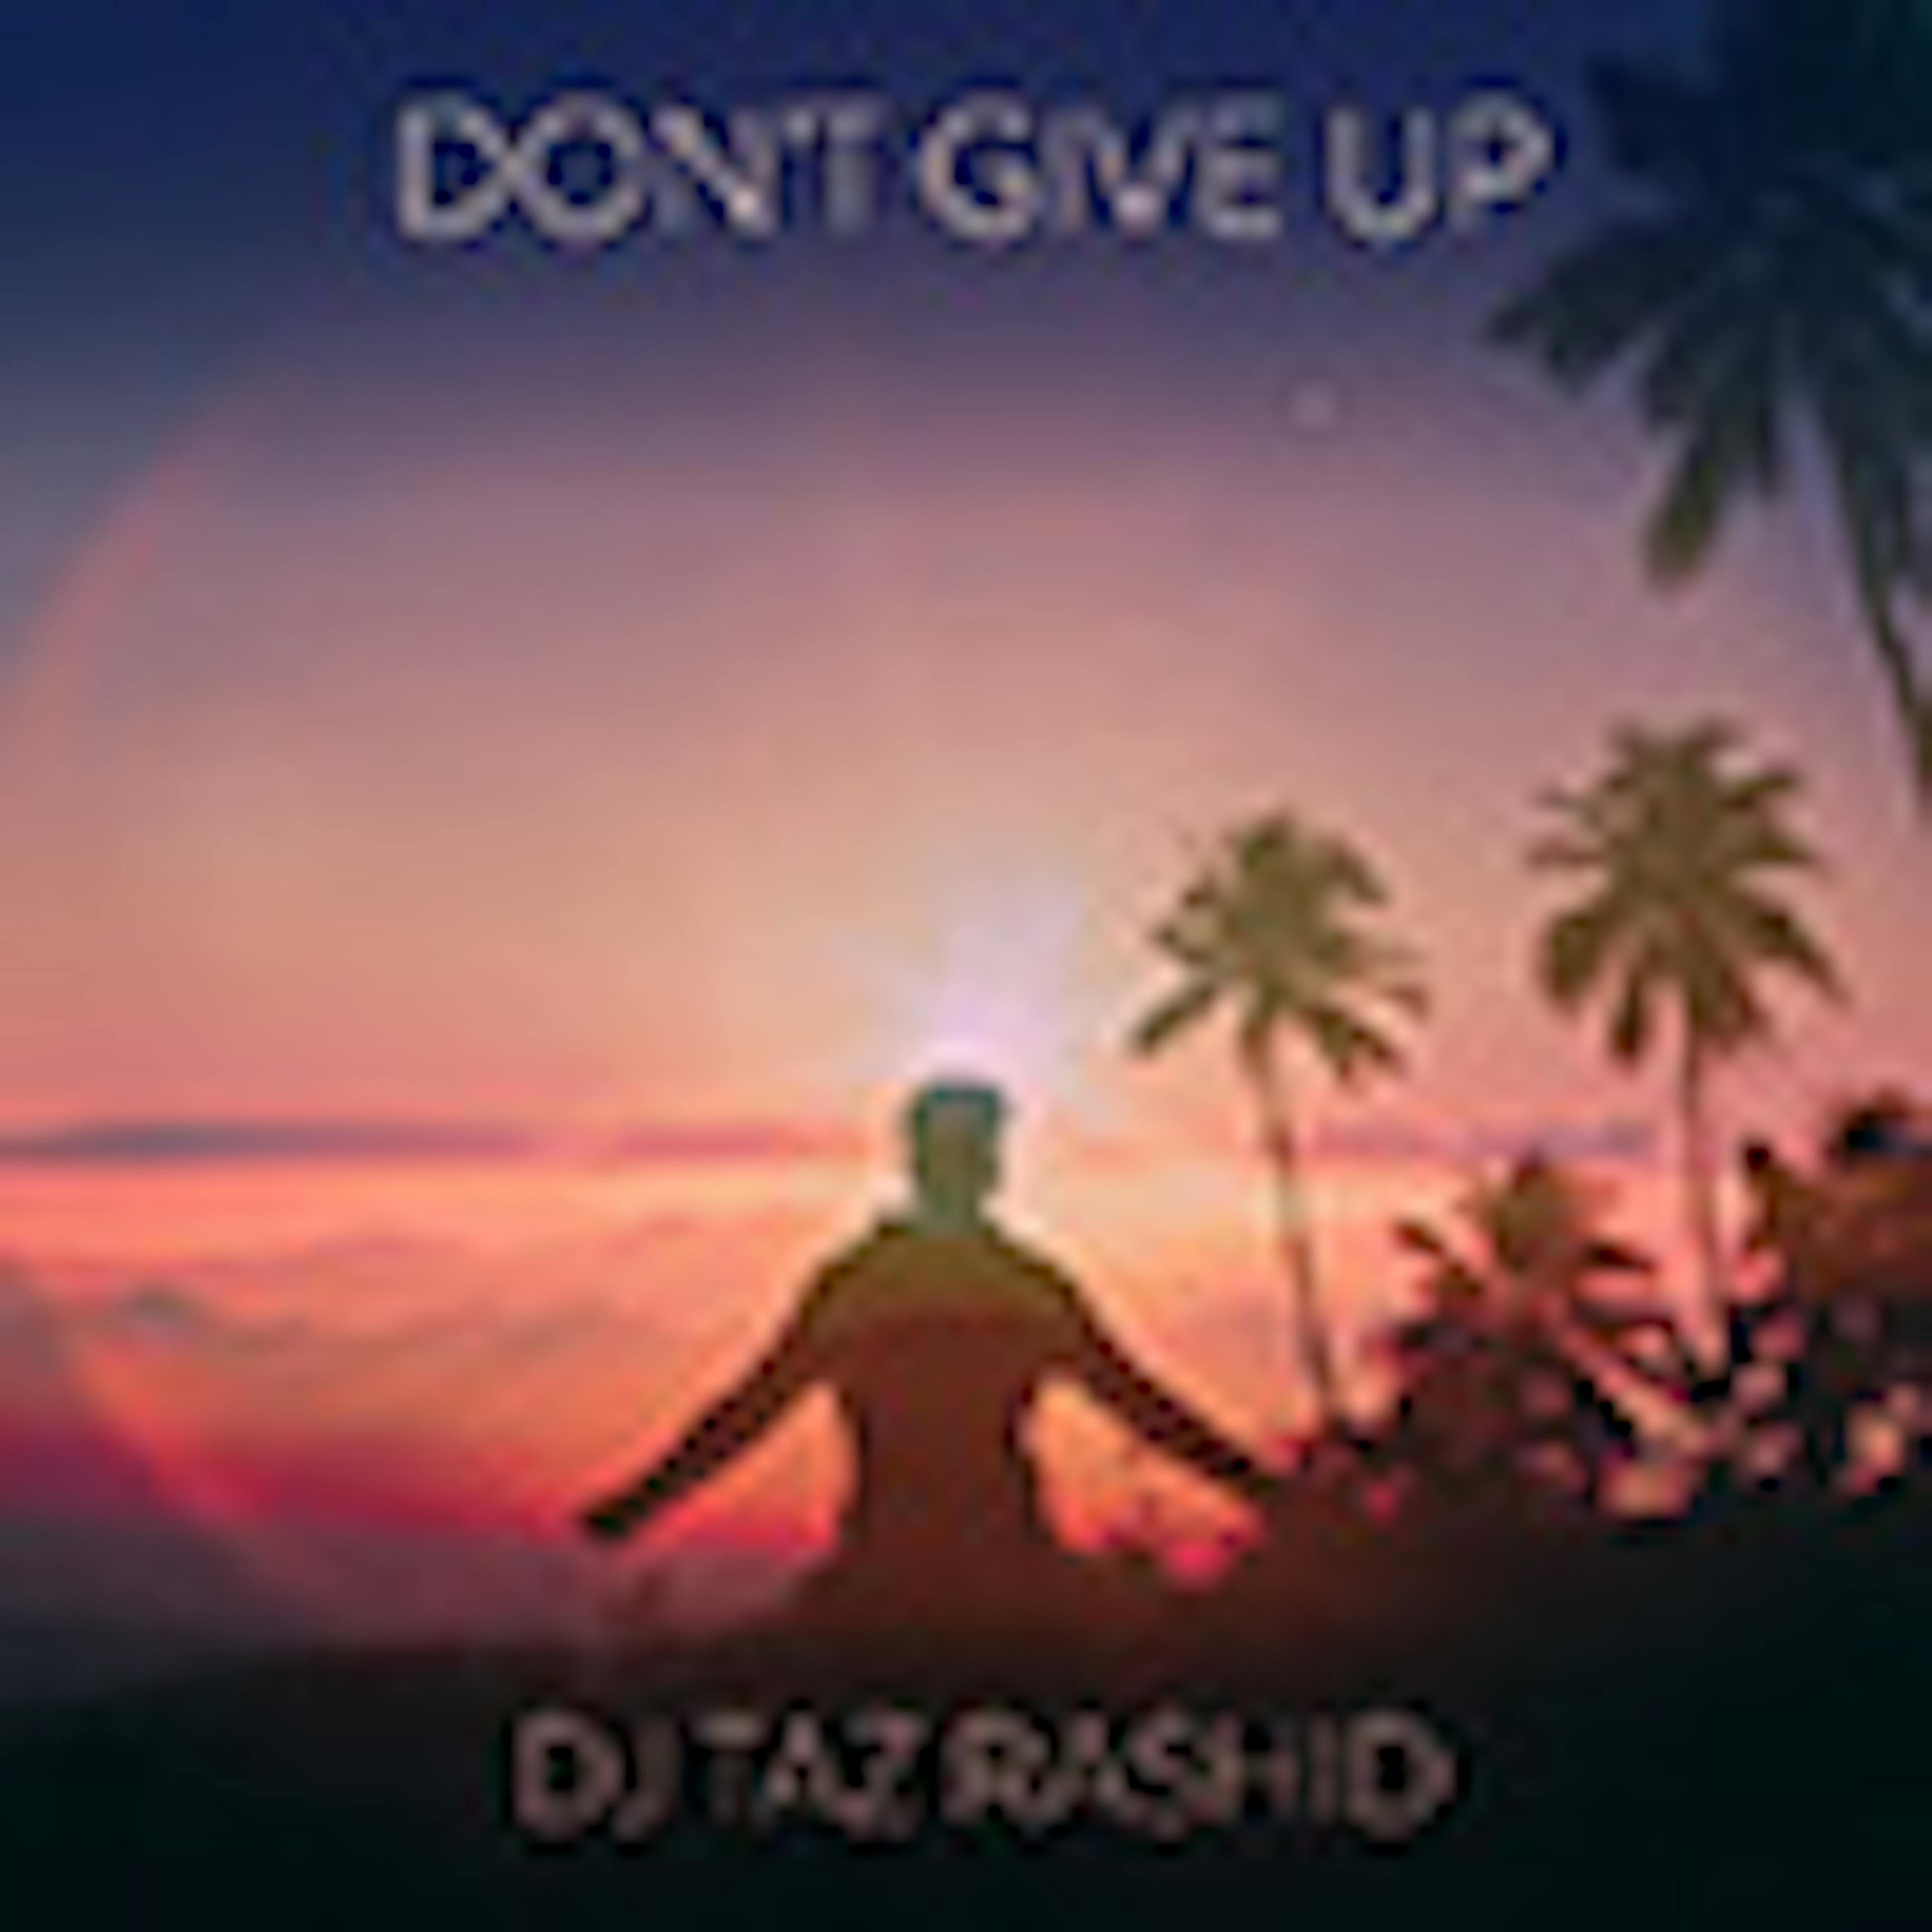 Don't Give Up album cover